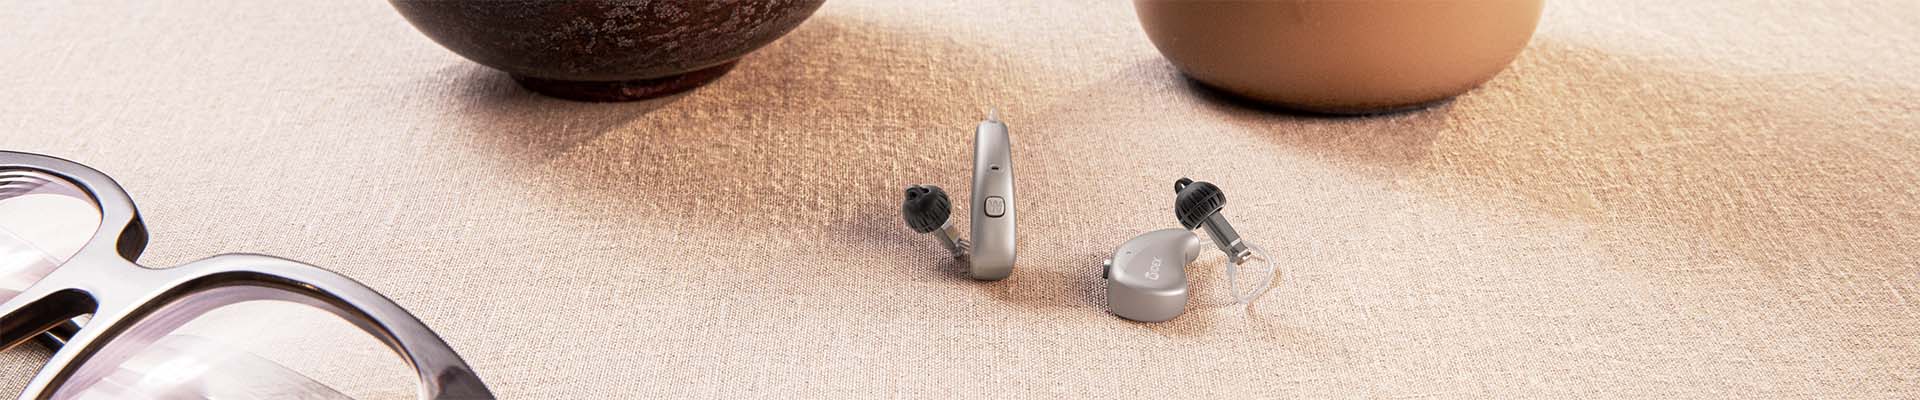 Widex Moment Sheer - sRIC hearing aids